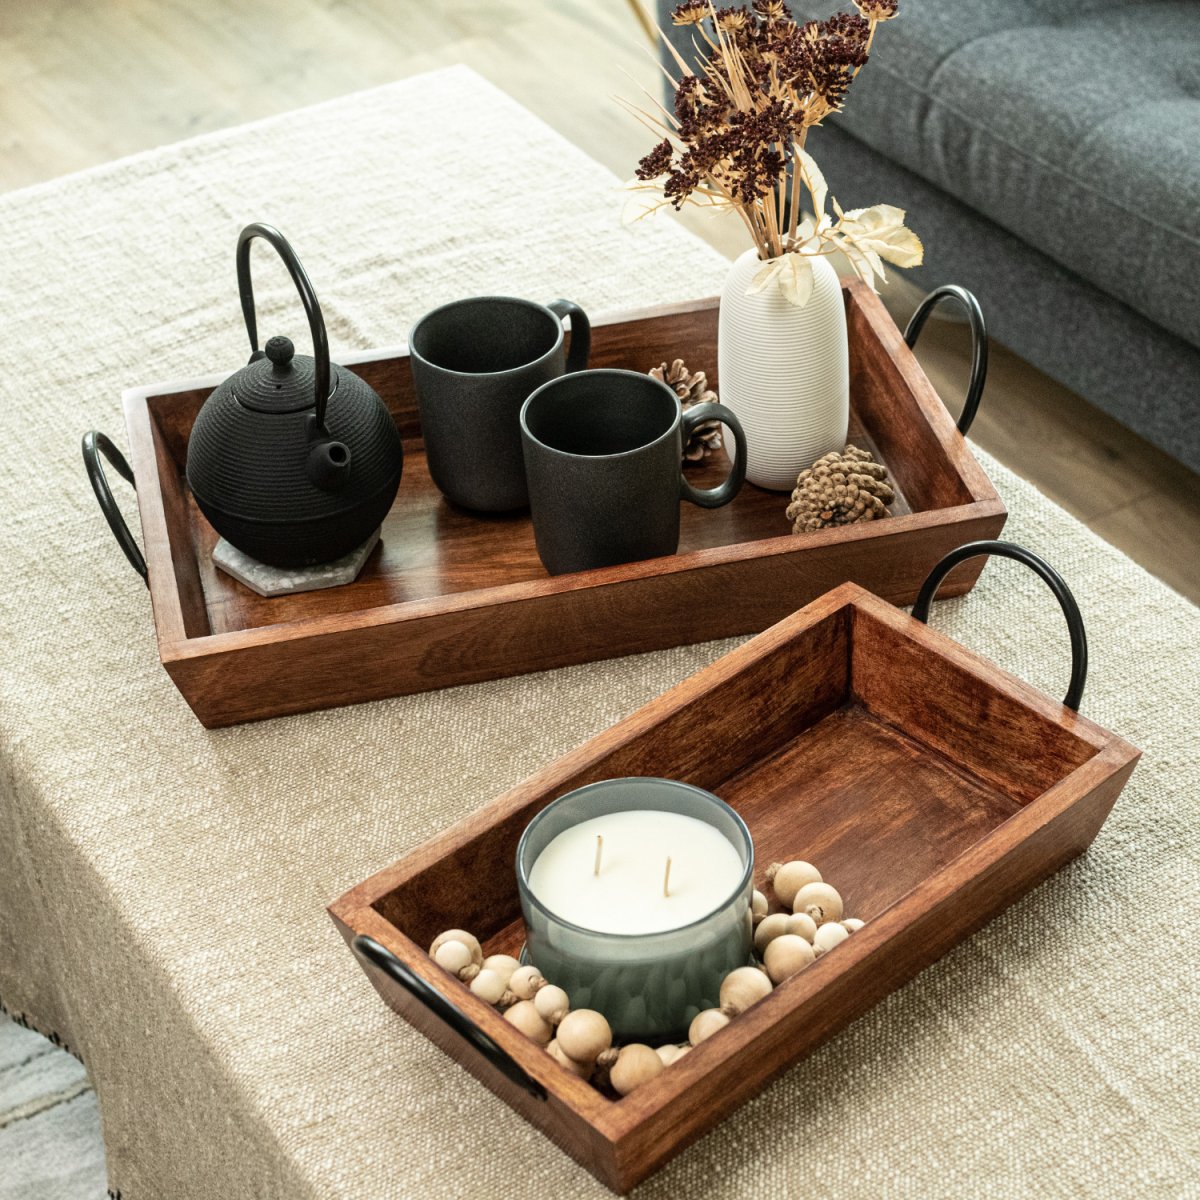 Rectangular Wooden Serving Trays with Black Metal Handles, Set of 2 on a coffee table - Aesthetic Living